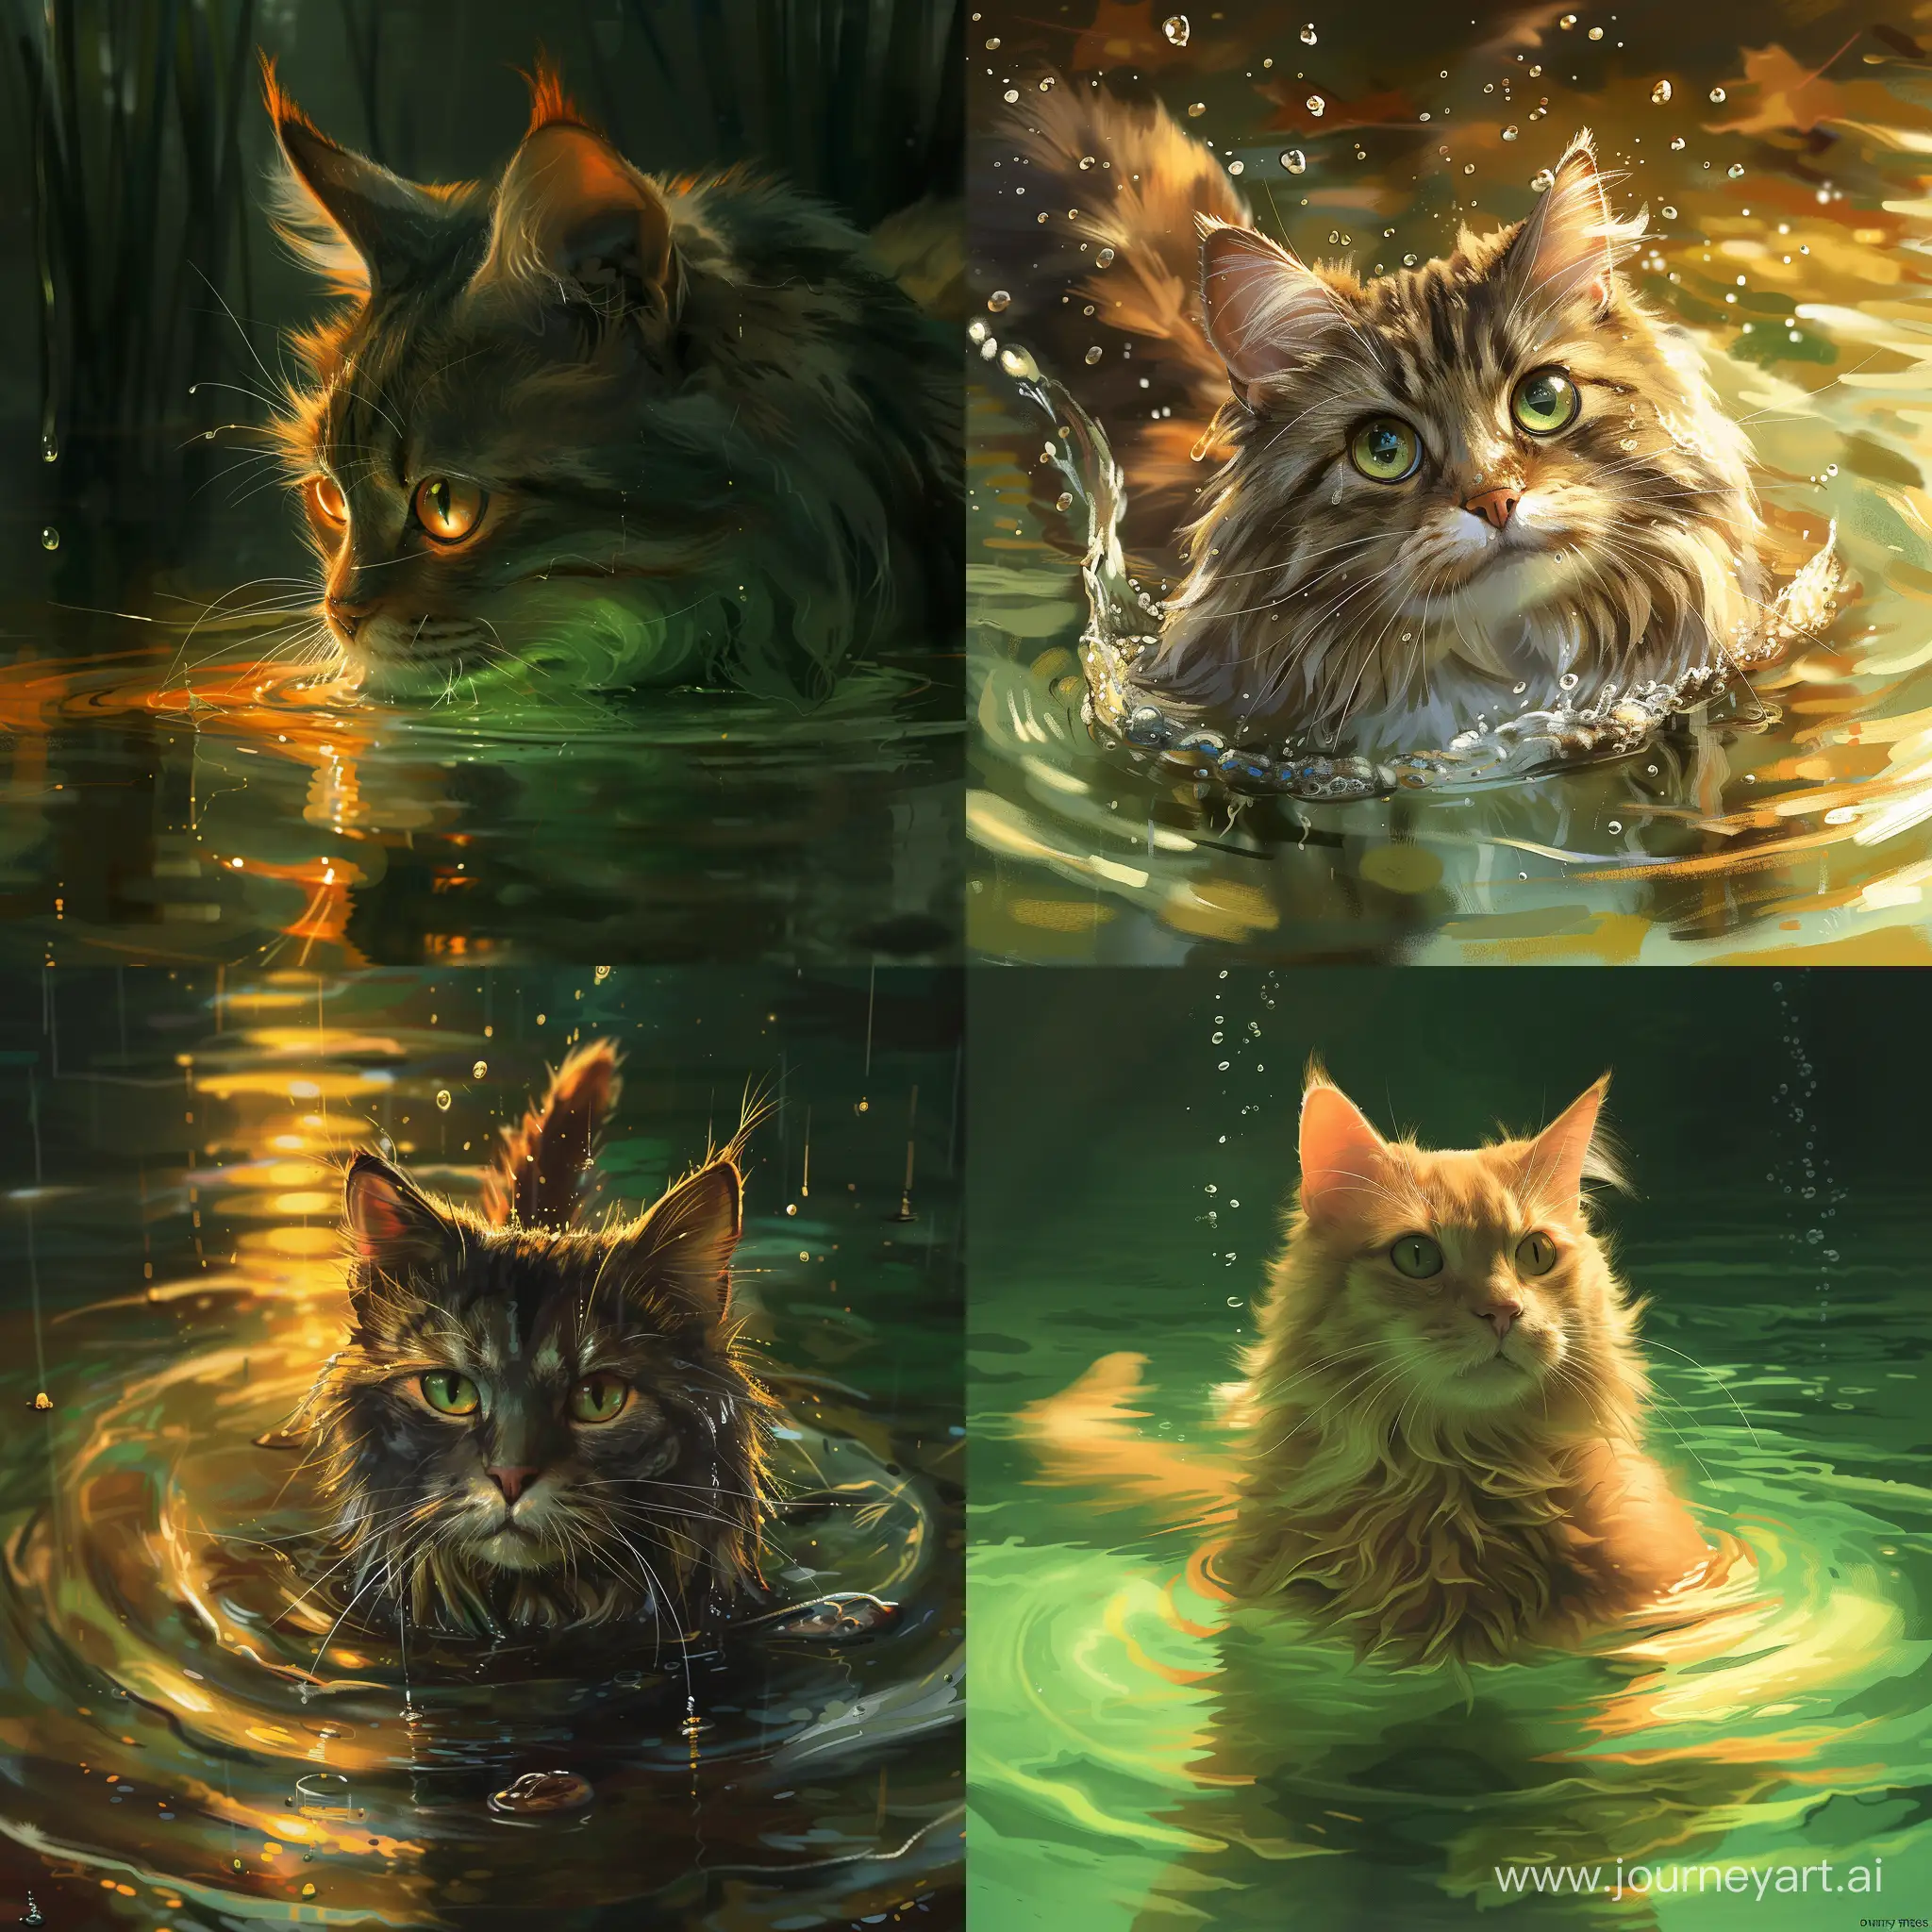 Realistic-Detailed-Rendering-of-a-Cat-Swimming-in-Green-and-Amber-Waters